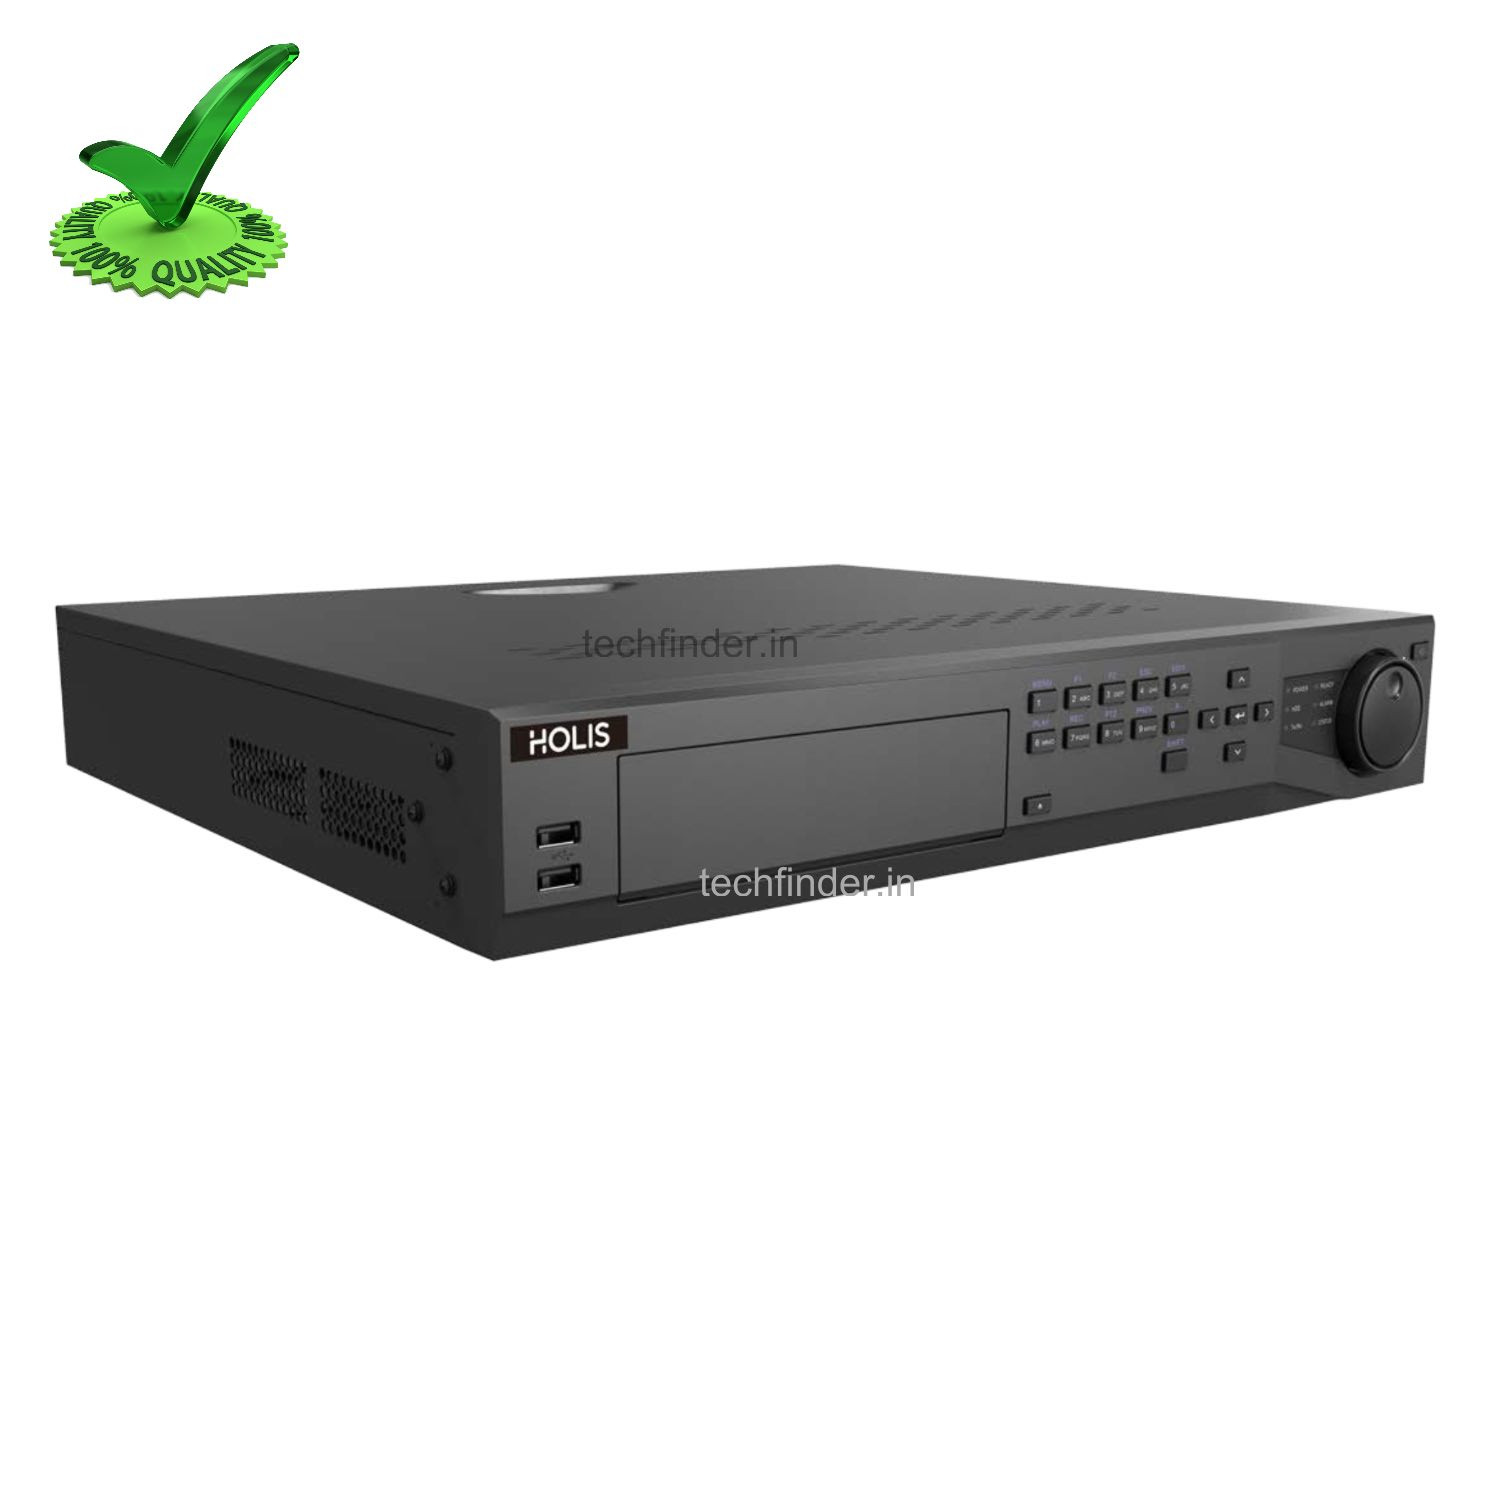 Holis Standard HOLNVR32-IN 32Ch Digital NVR from Tyco